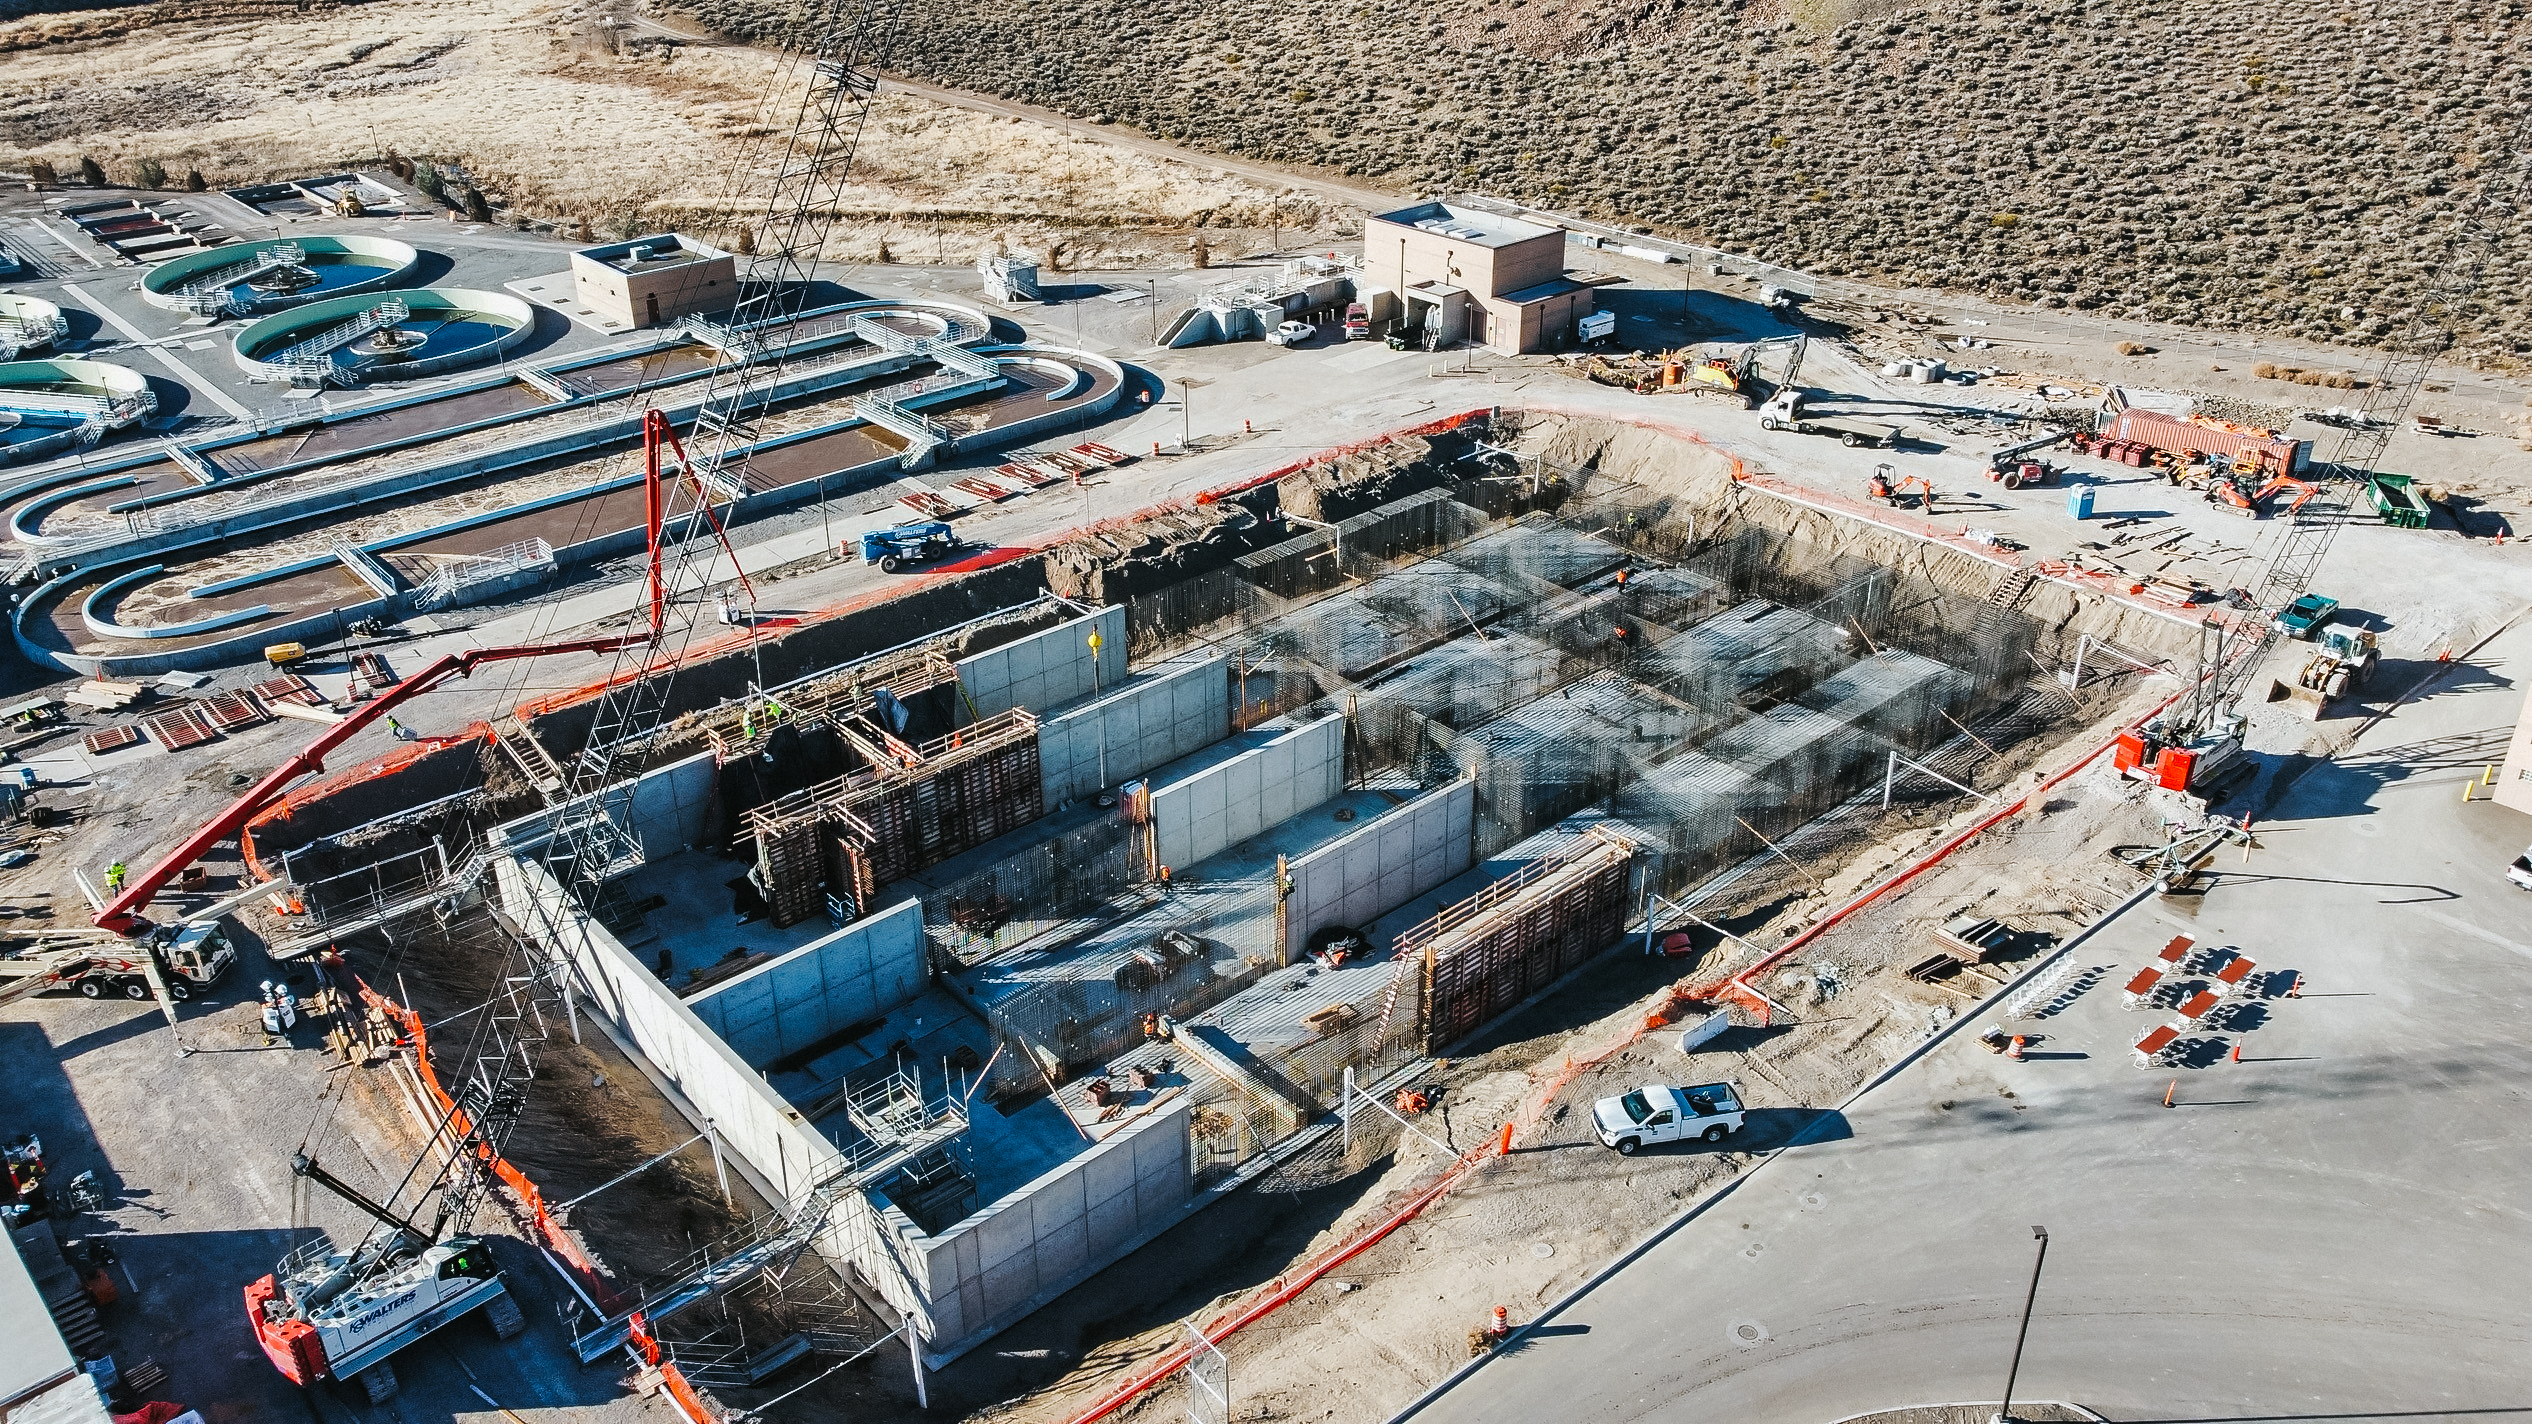 South Truckee Meadows Water Reclamation Facility Expansion